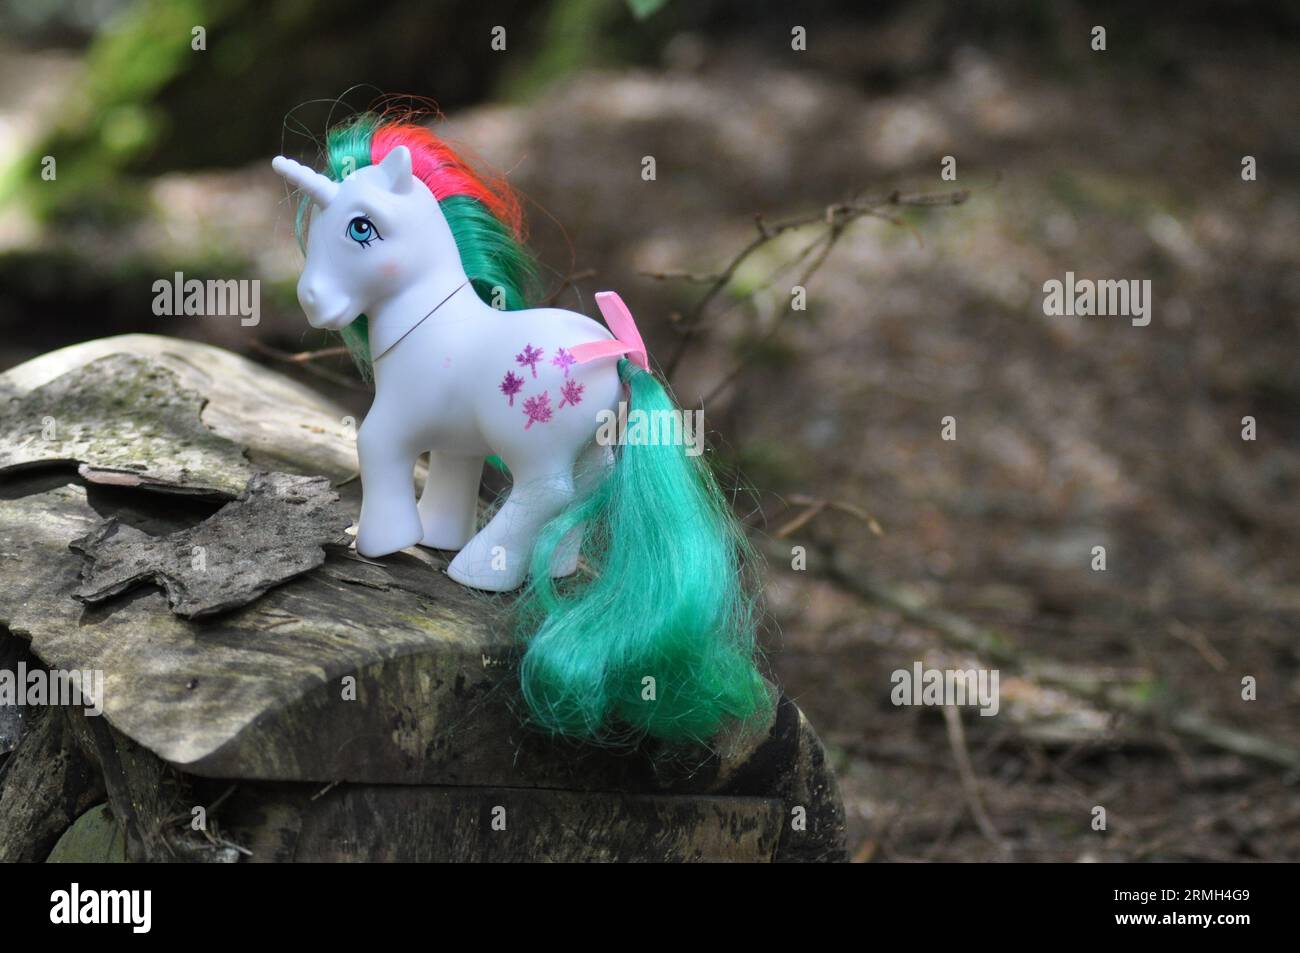 My Little Pony Figurine of Gusty the unicorn (1984) by Hasbro set in a woodland surrounding Stock Photo